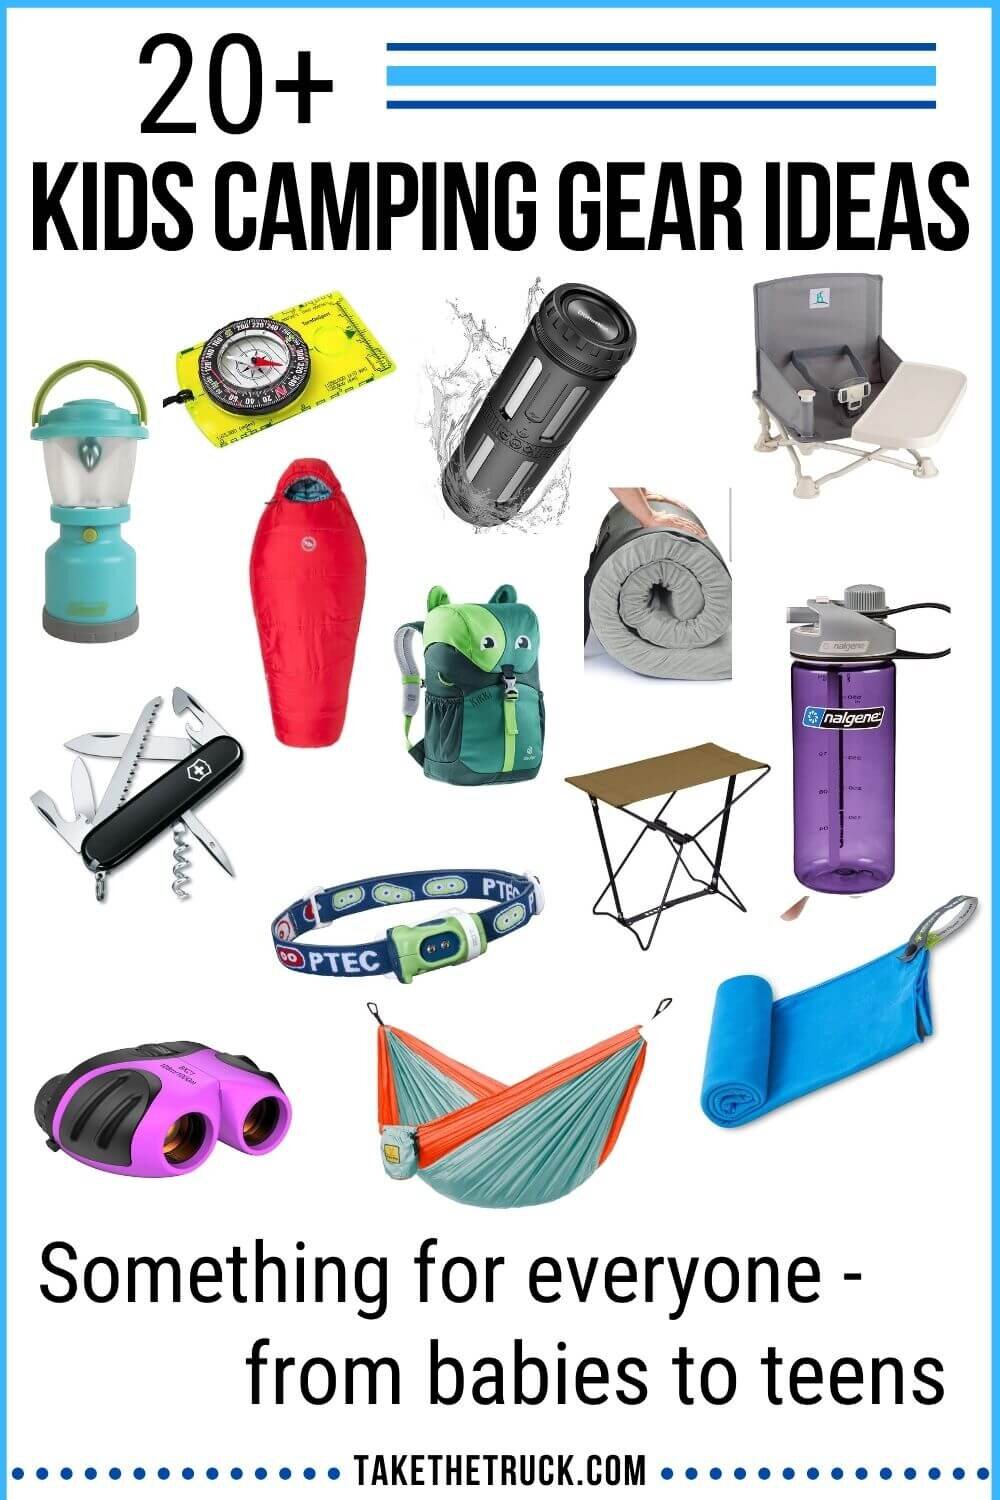 Looking for the best kids’ camping gear to buy for the children in your life? Check out over 20 useful camping gear ideas that make great outdoor gear gifts for kids, from babies on up to teens.